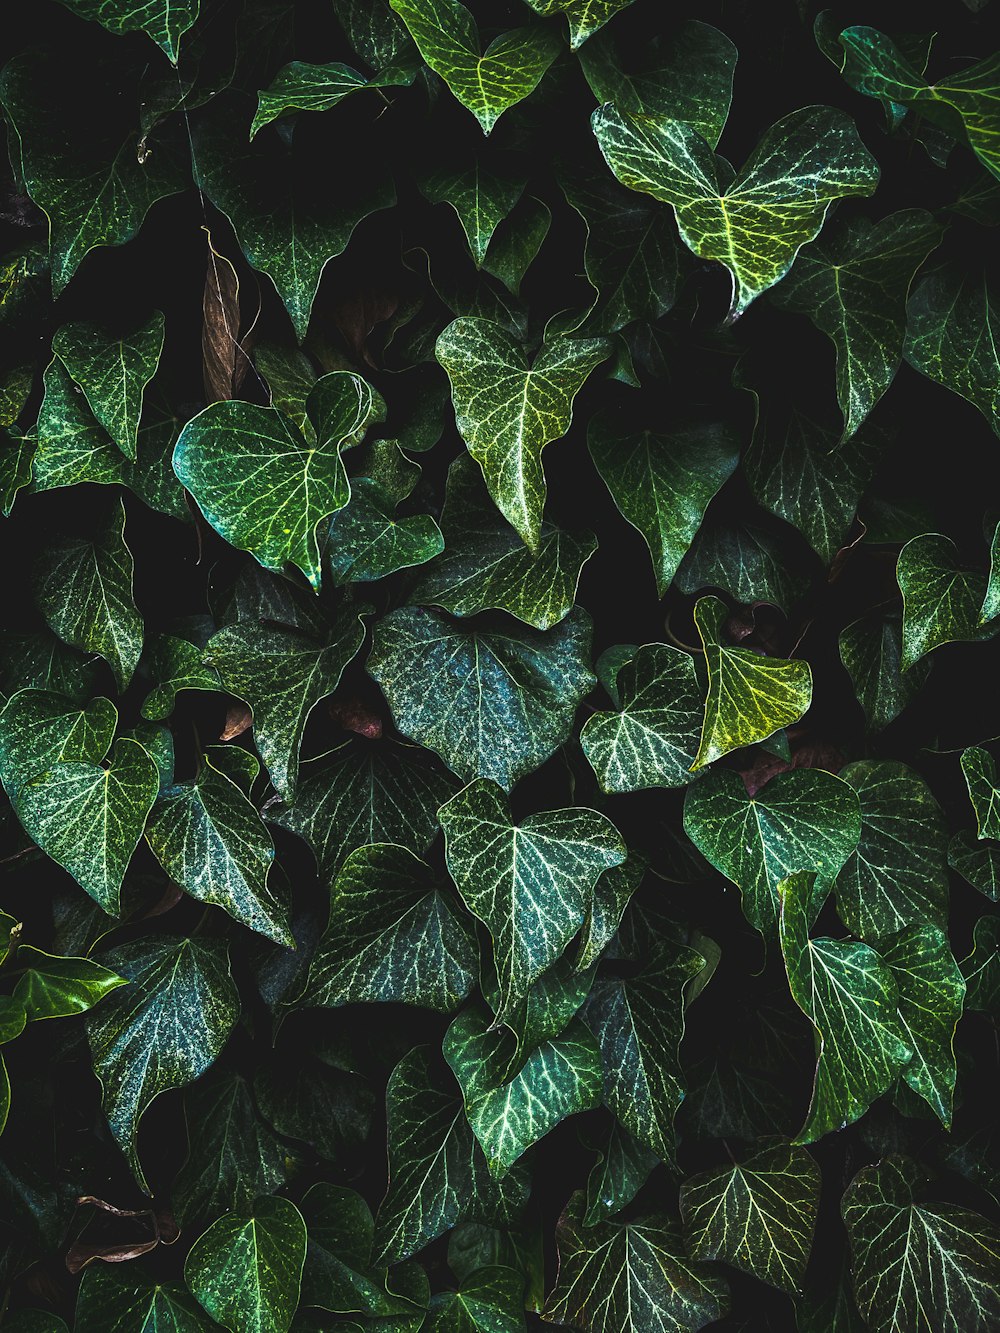 a group of green leaves